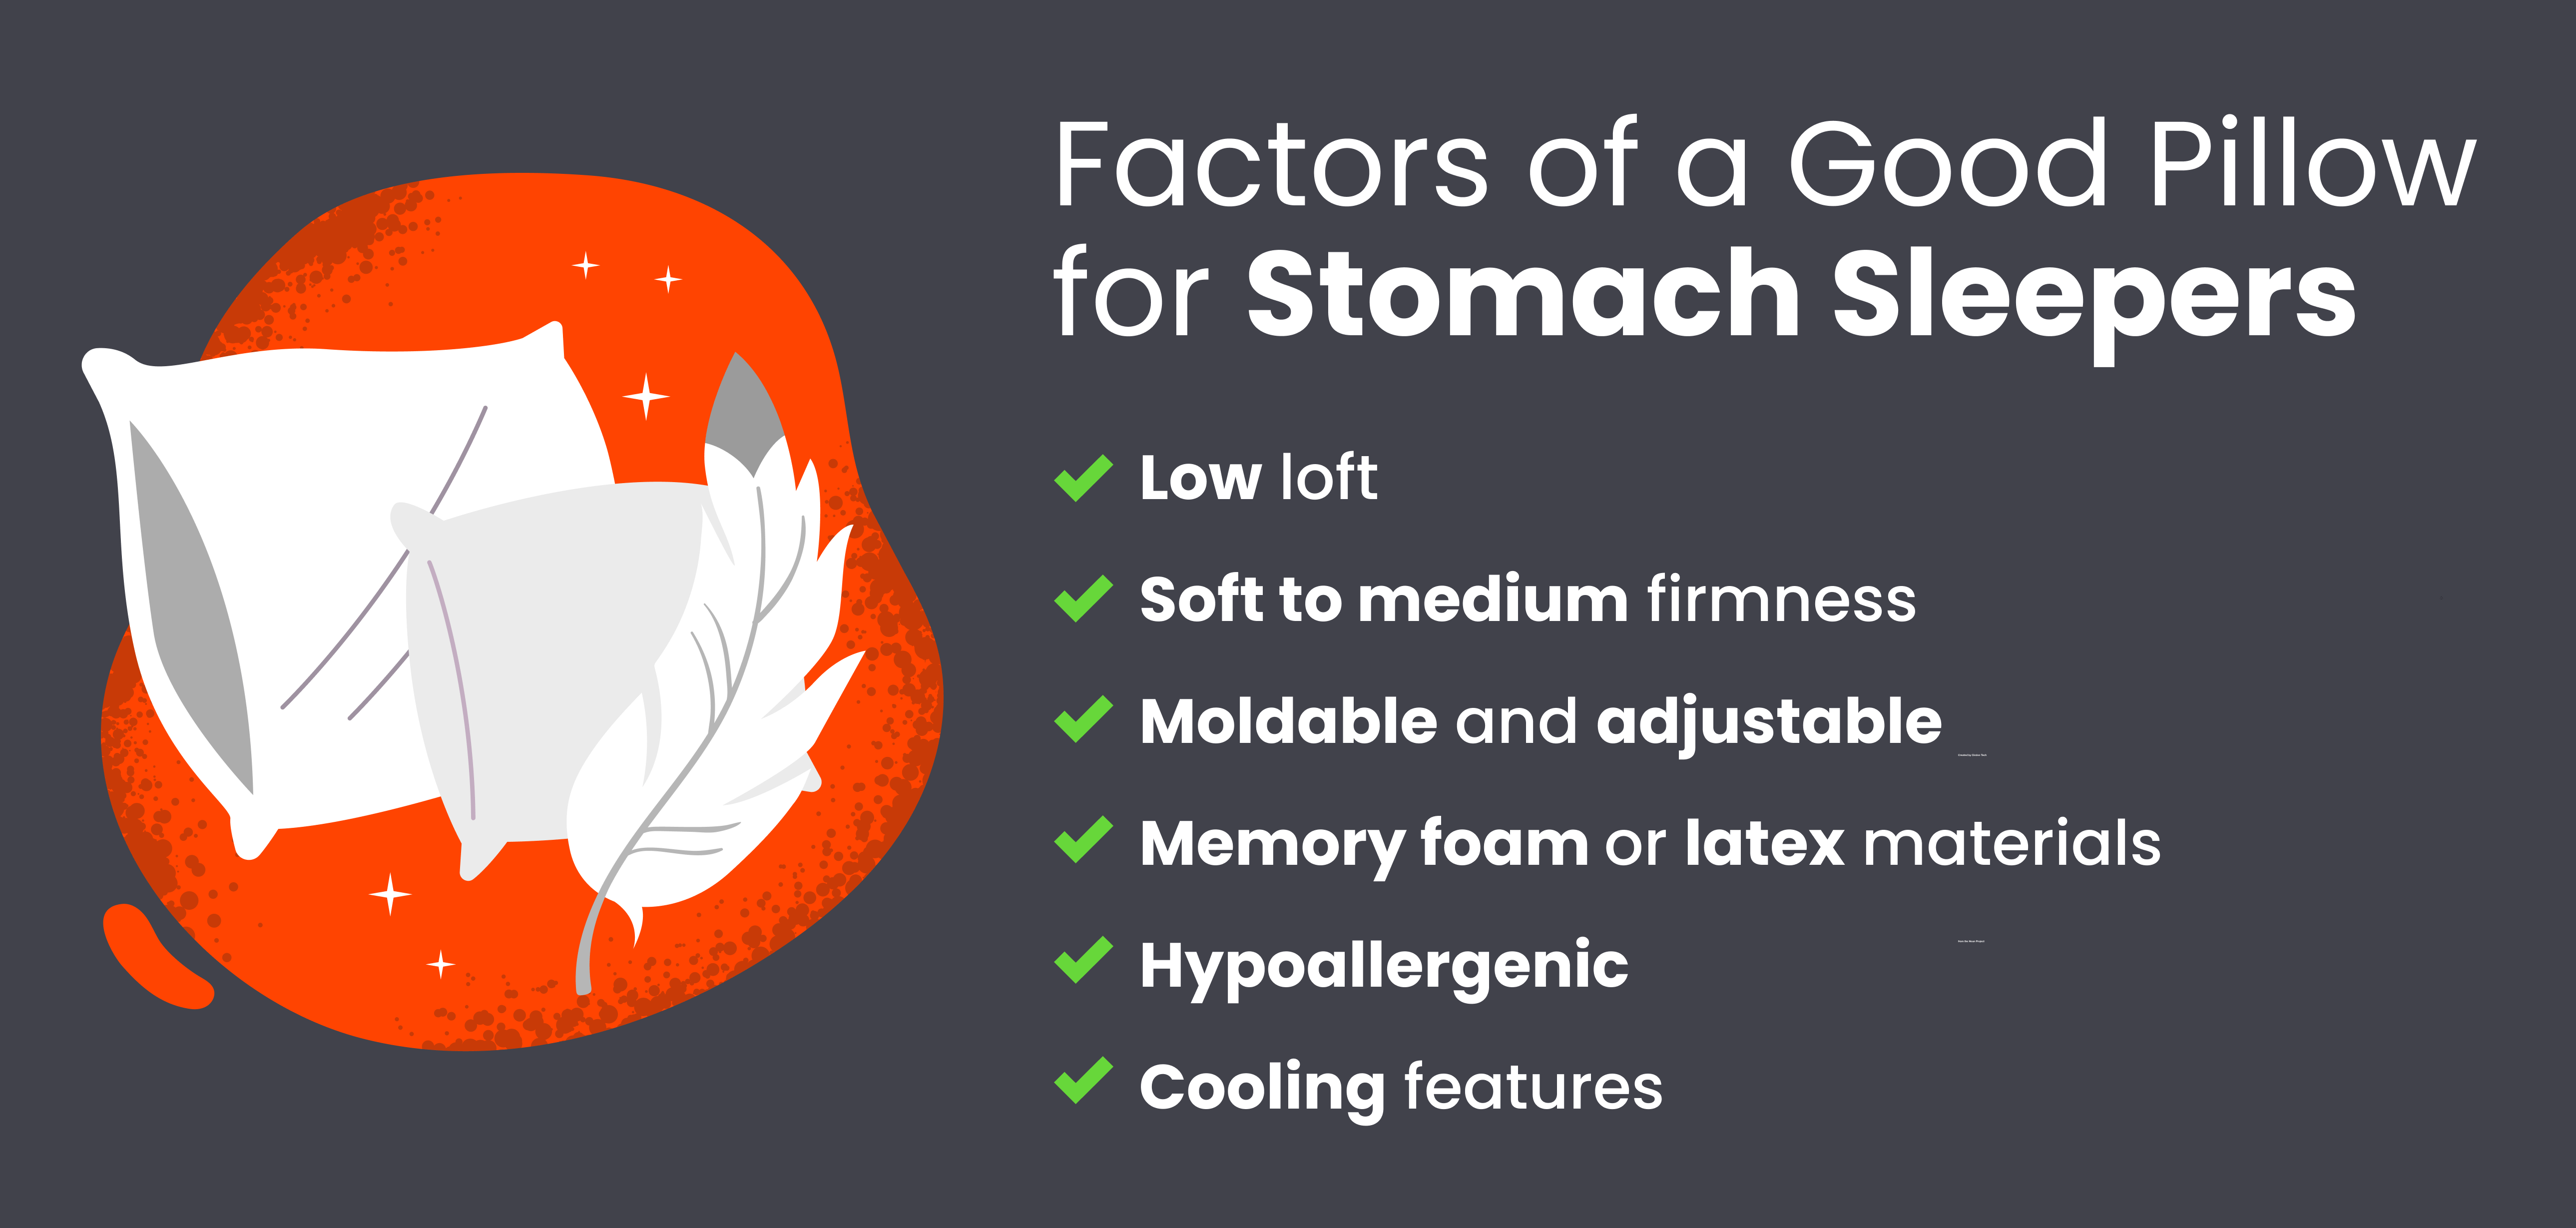 Factors of a good pillow for stomach sleepers